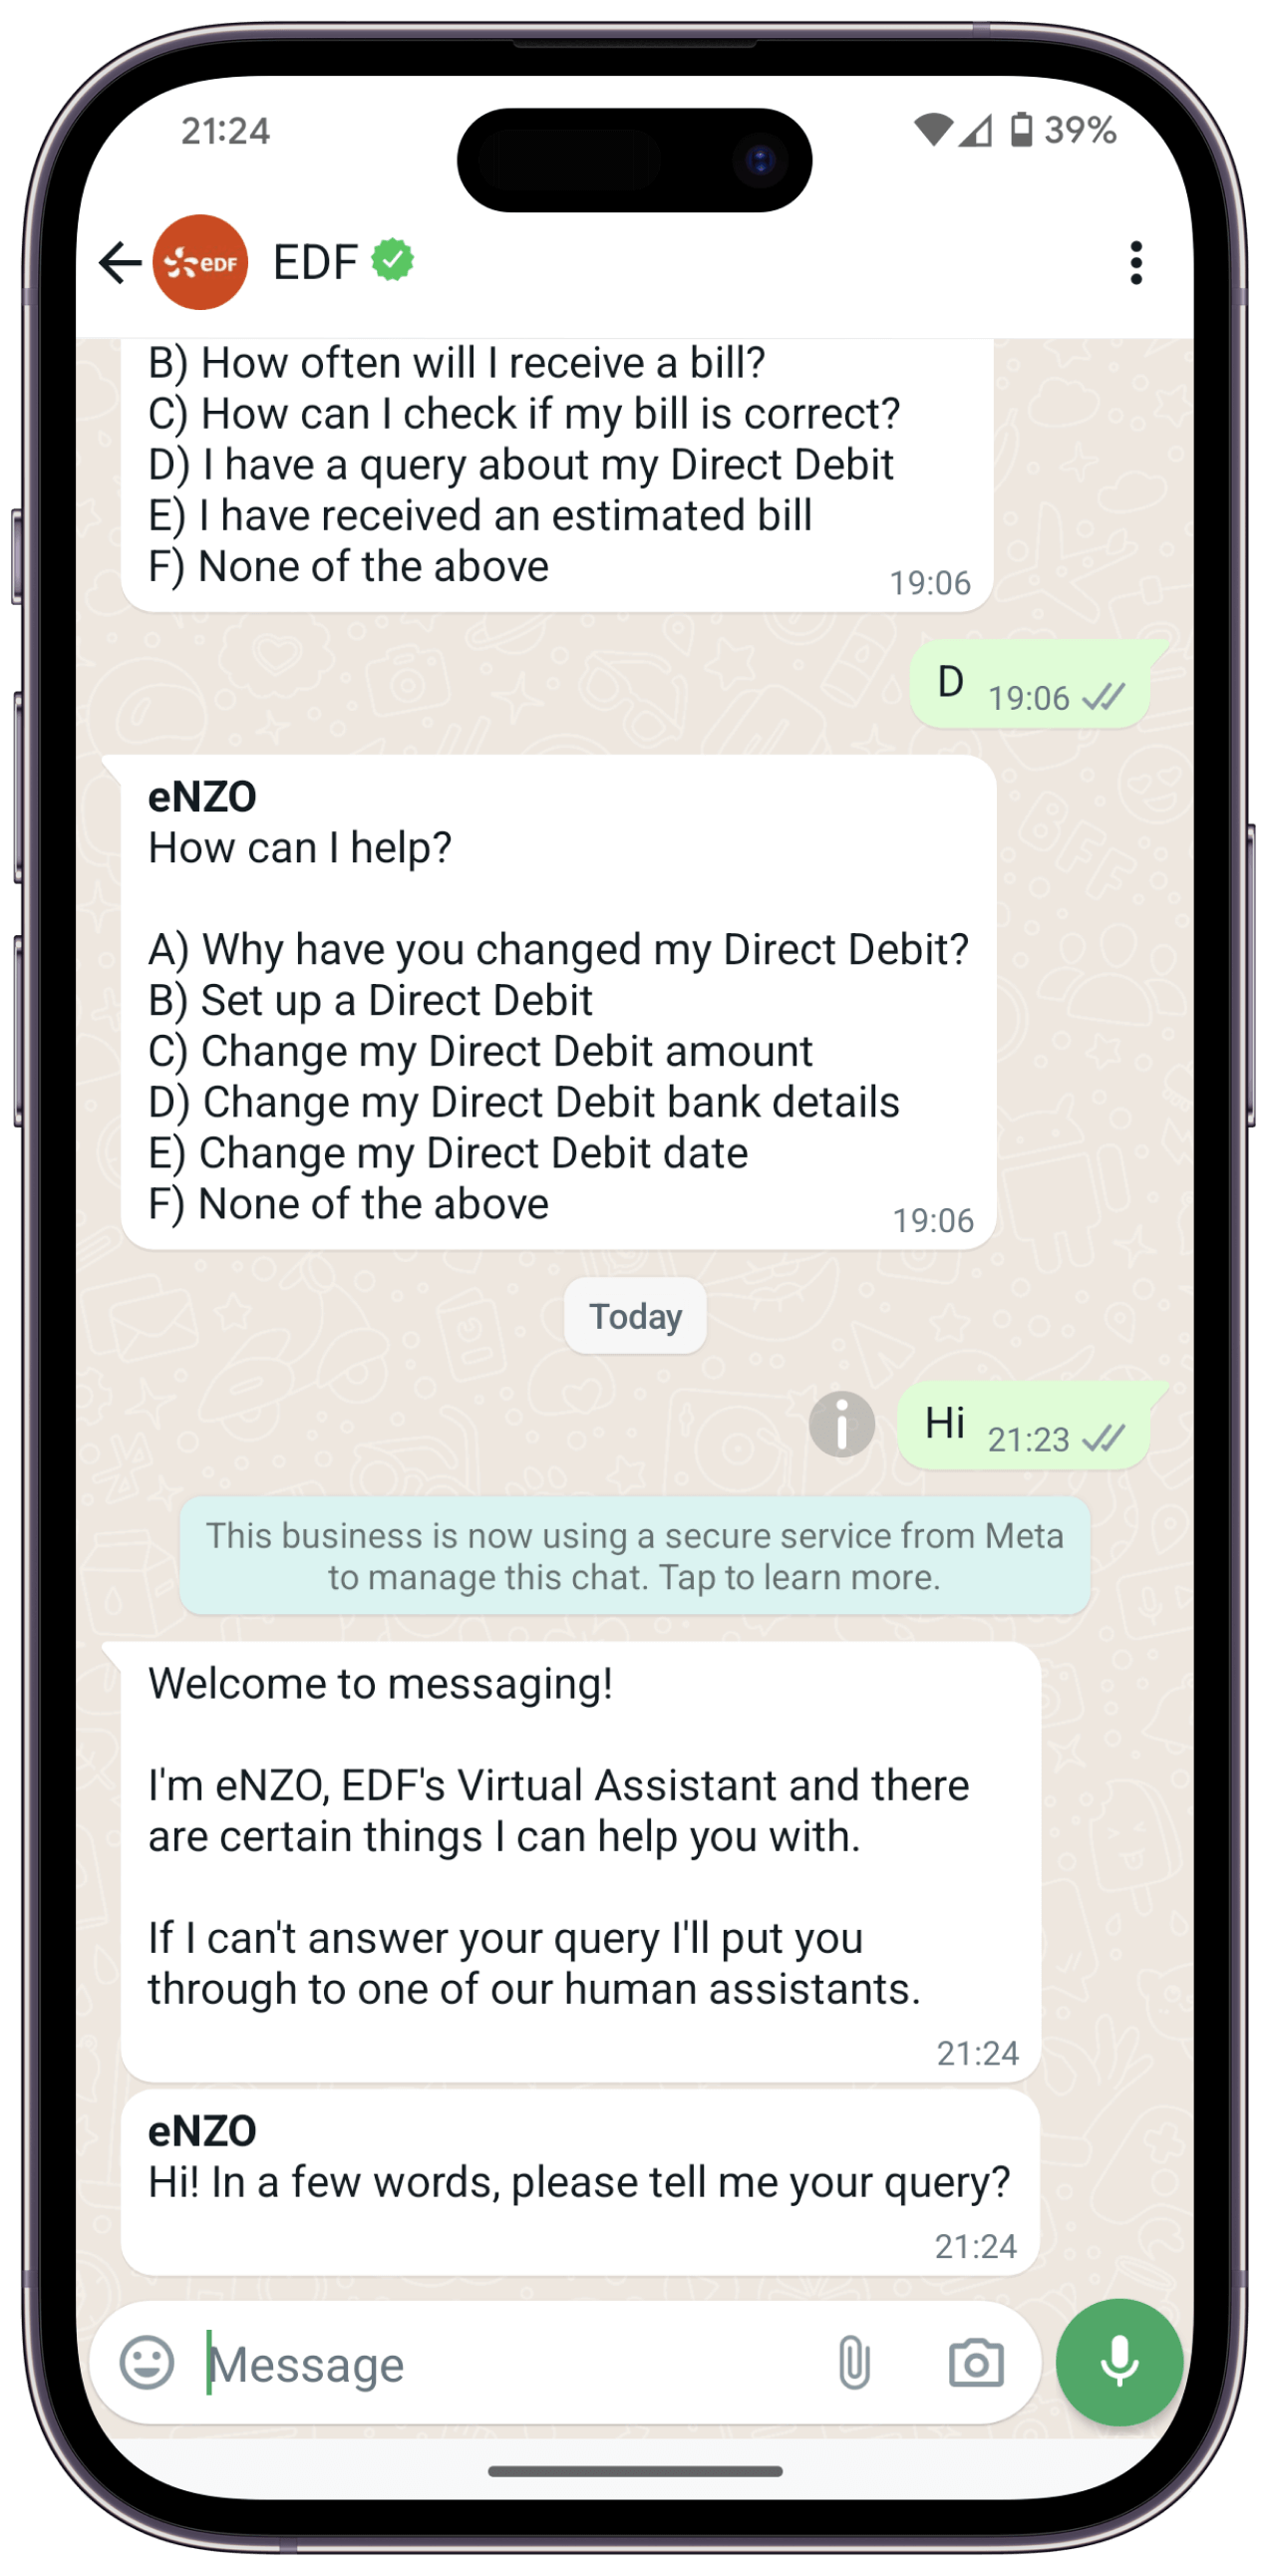 WhatsApp conversation about paying bills, showing how digital technology can provide energy services to assist oil and gas industry businesses